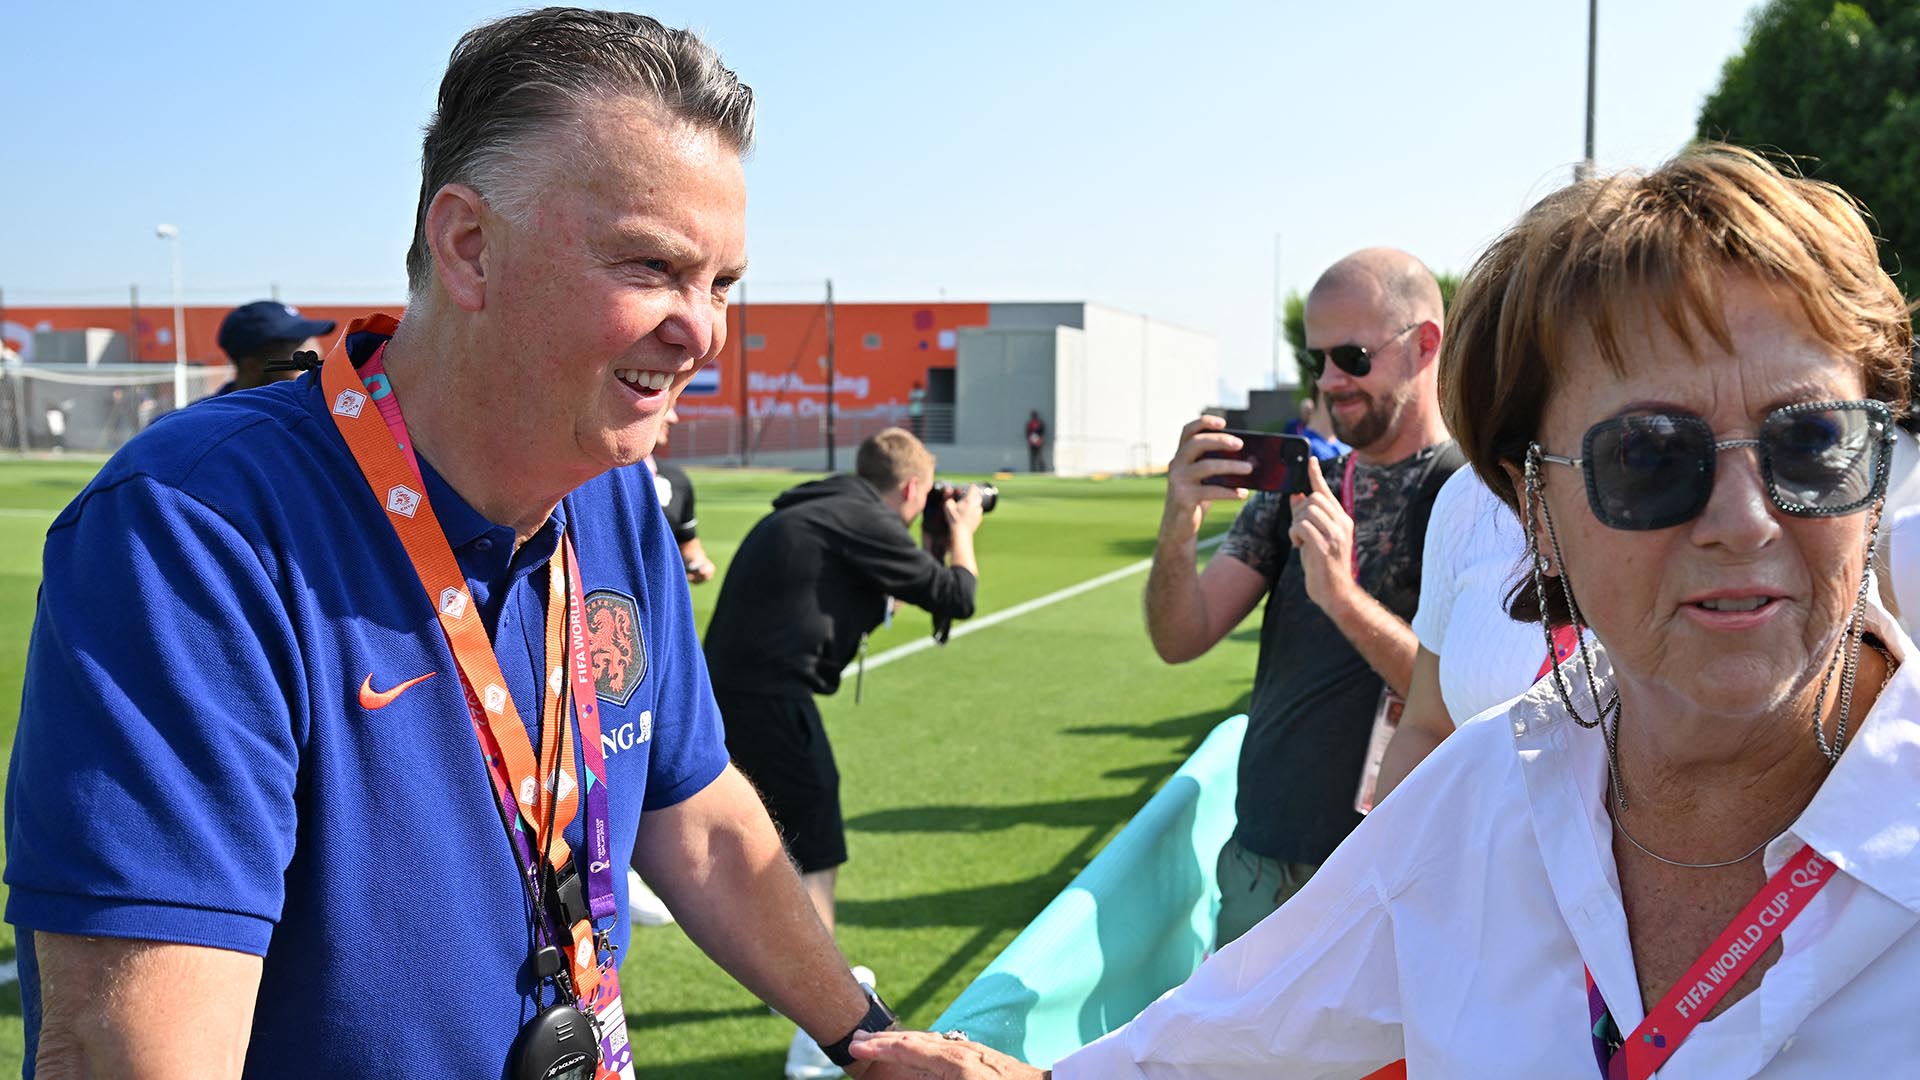 Netherlands' coach Louis Van Gaal (L) talks with his wife Truss Van Gaal during a meeting with relatives after a training session at Qatar University training ground in Doha on November 22, 2022 during the Qatar 2022 World Cup football tournament. (Photo by Alberto PIZZOLI / AFP)